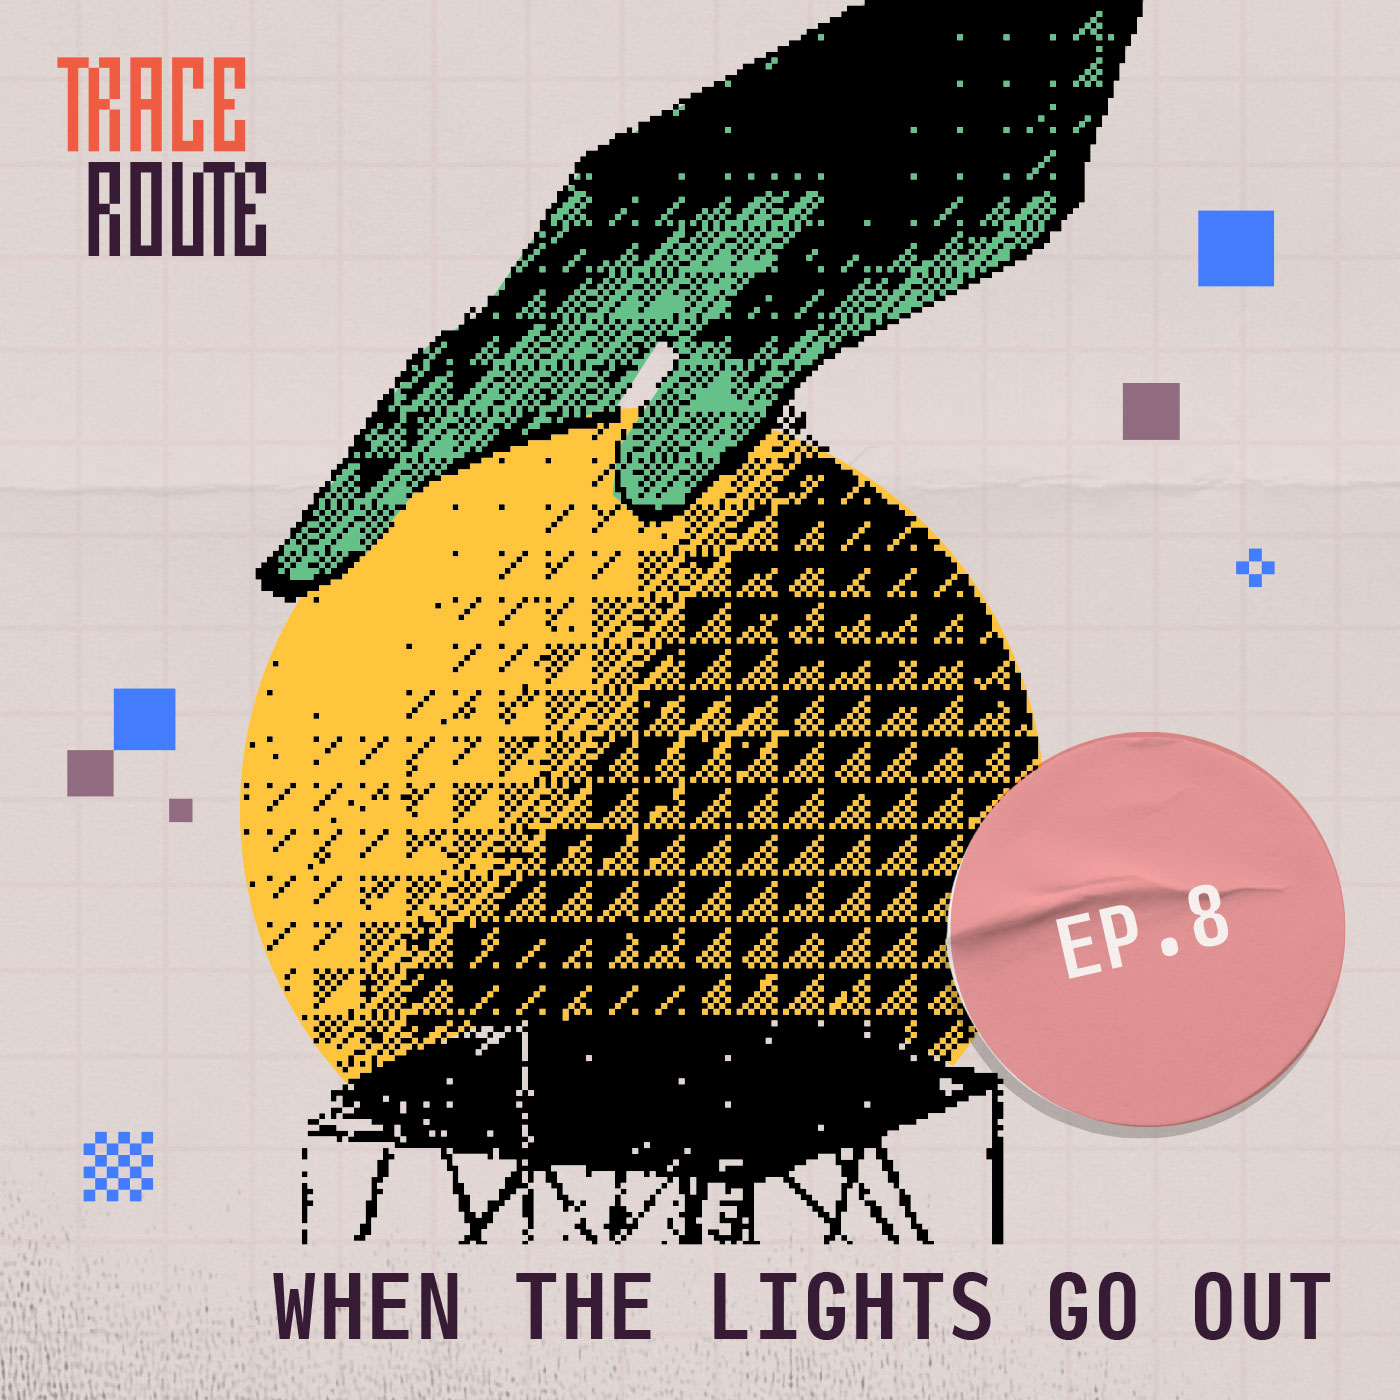 Artwork for podcast Traceroute